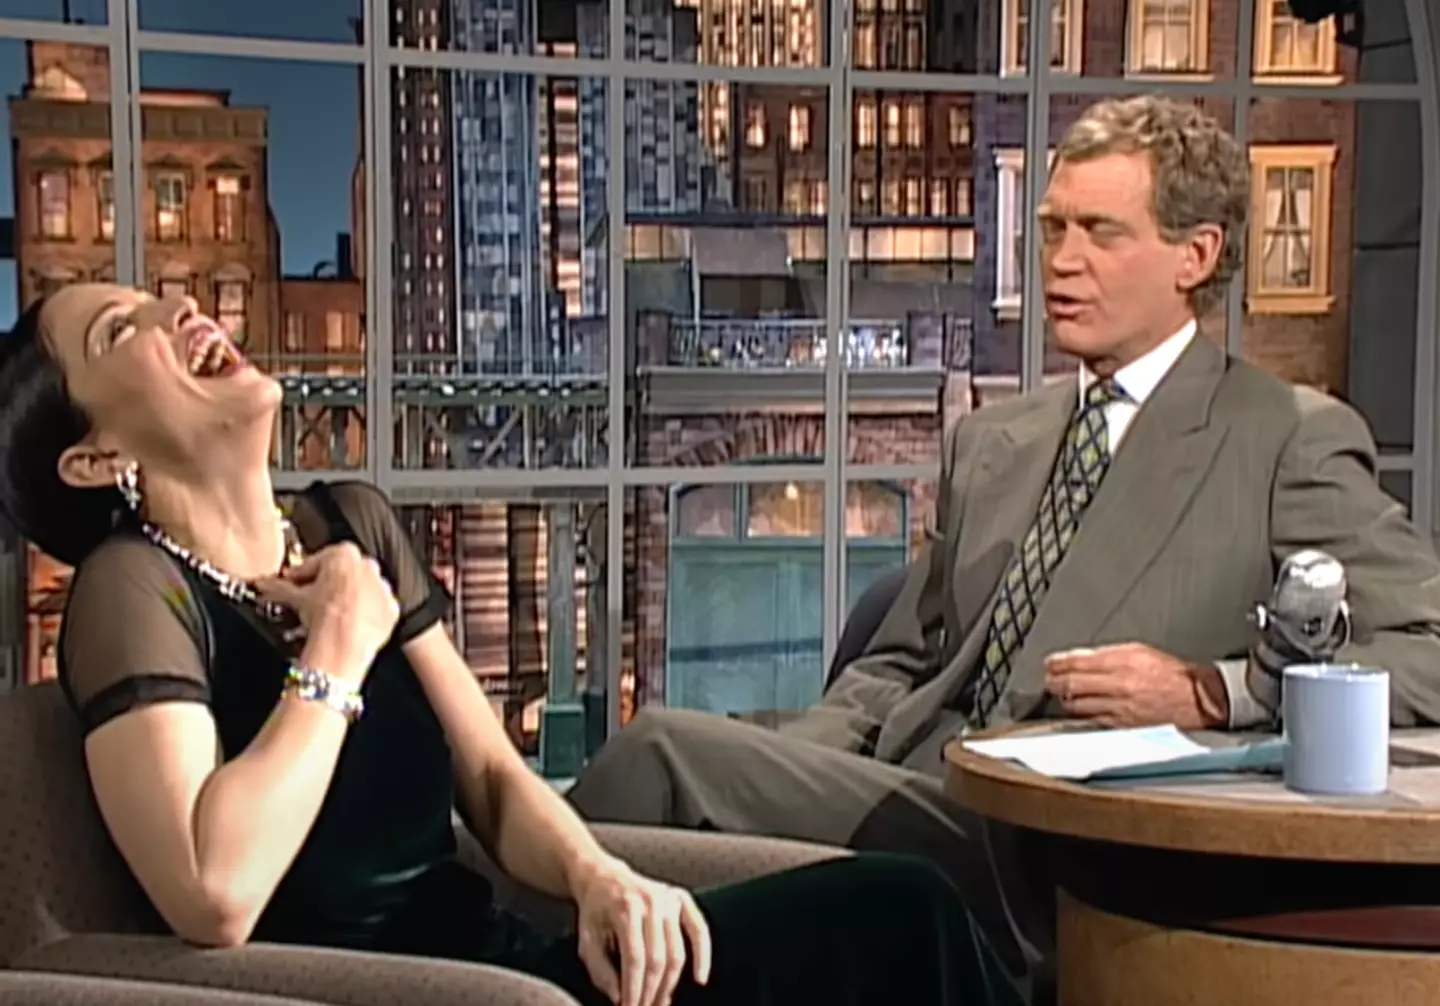 Madonna is being praised for how she handled Letterman.